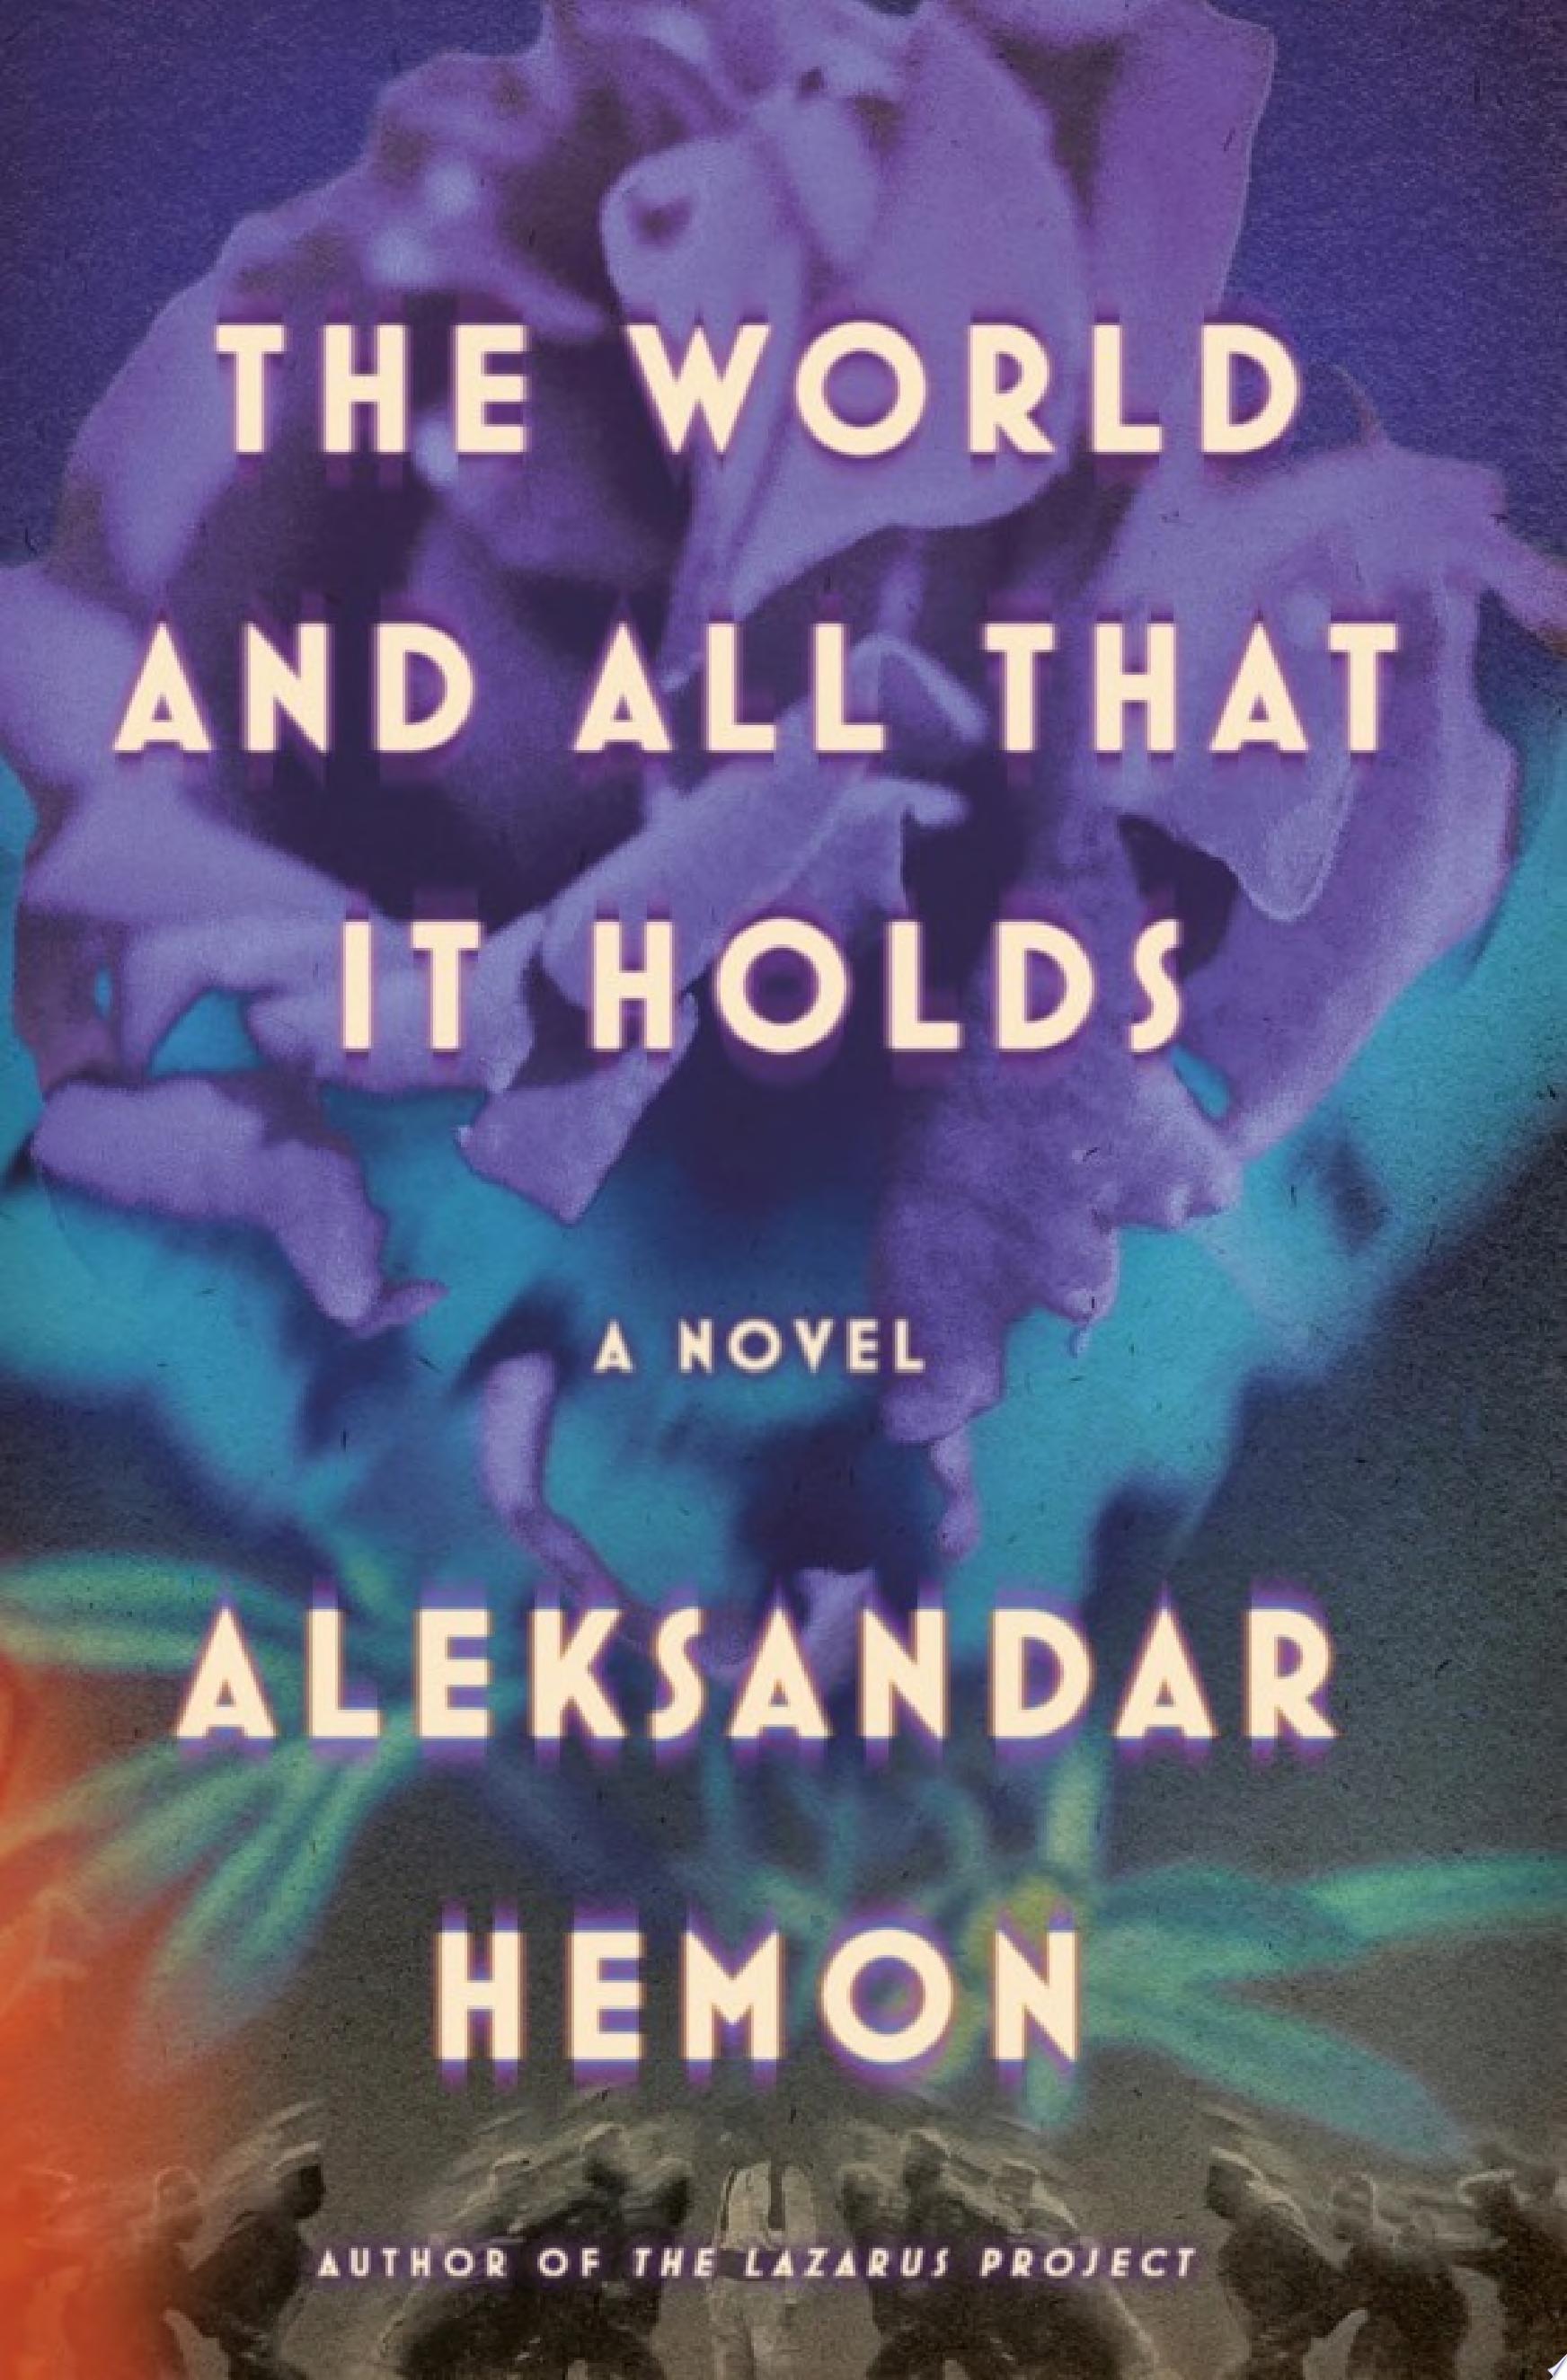 Image for "The World and All That It Holds"